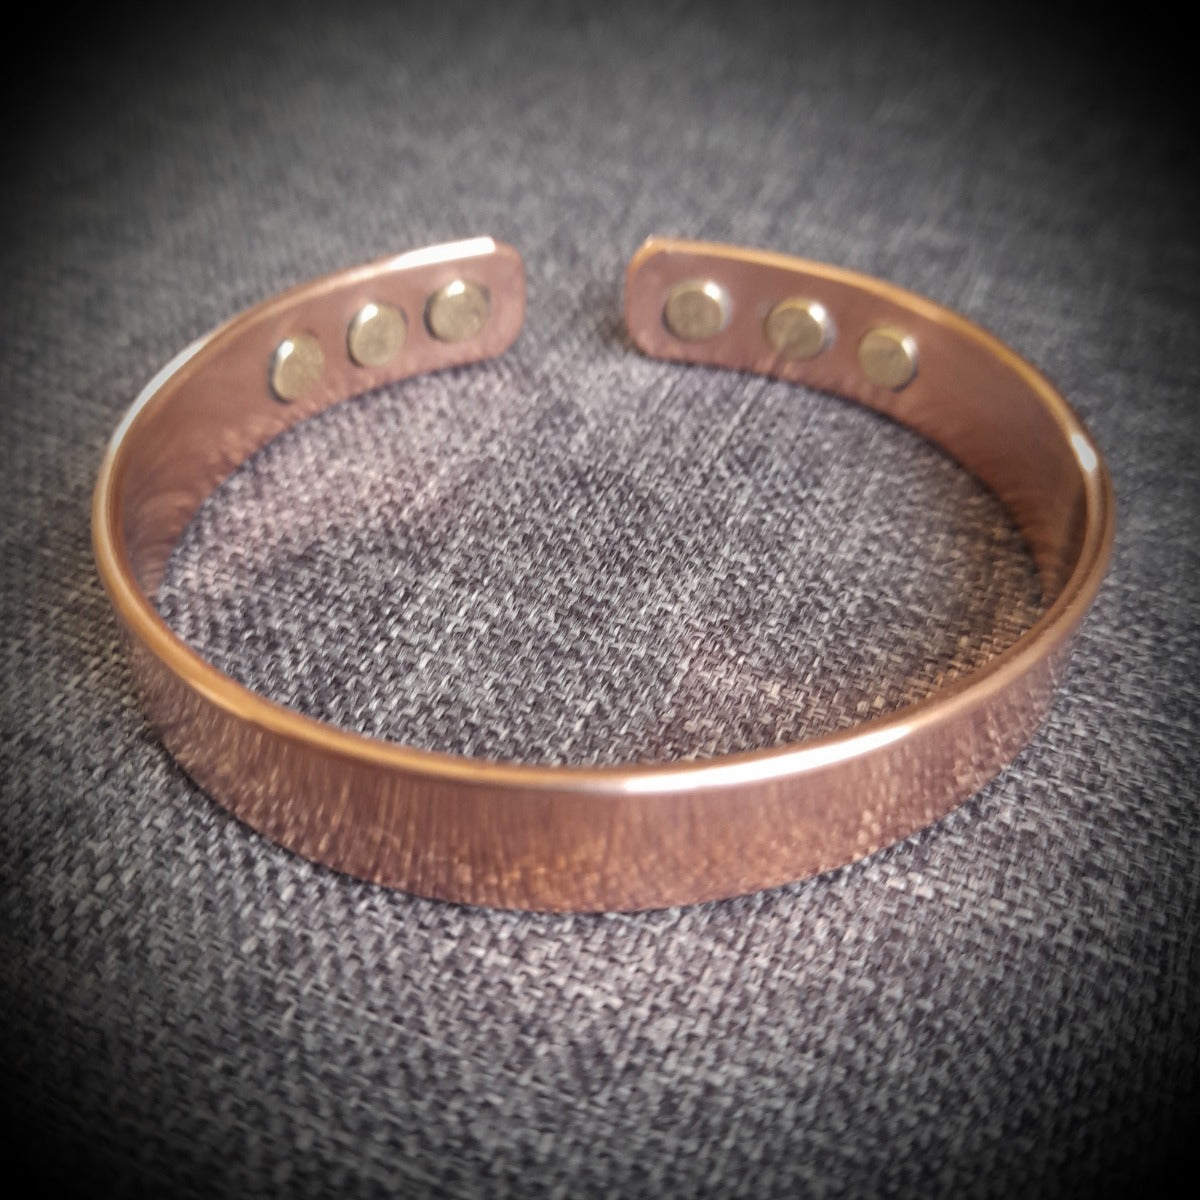 B17 100% Pure Copper Magnetic Band "Made in NZ"- 6 Magnets